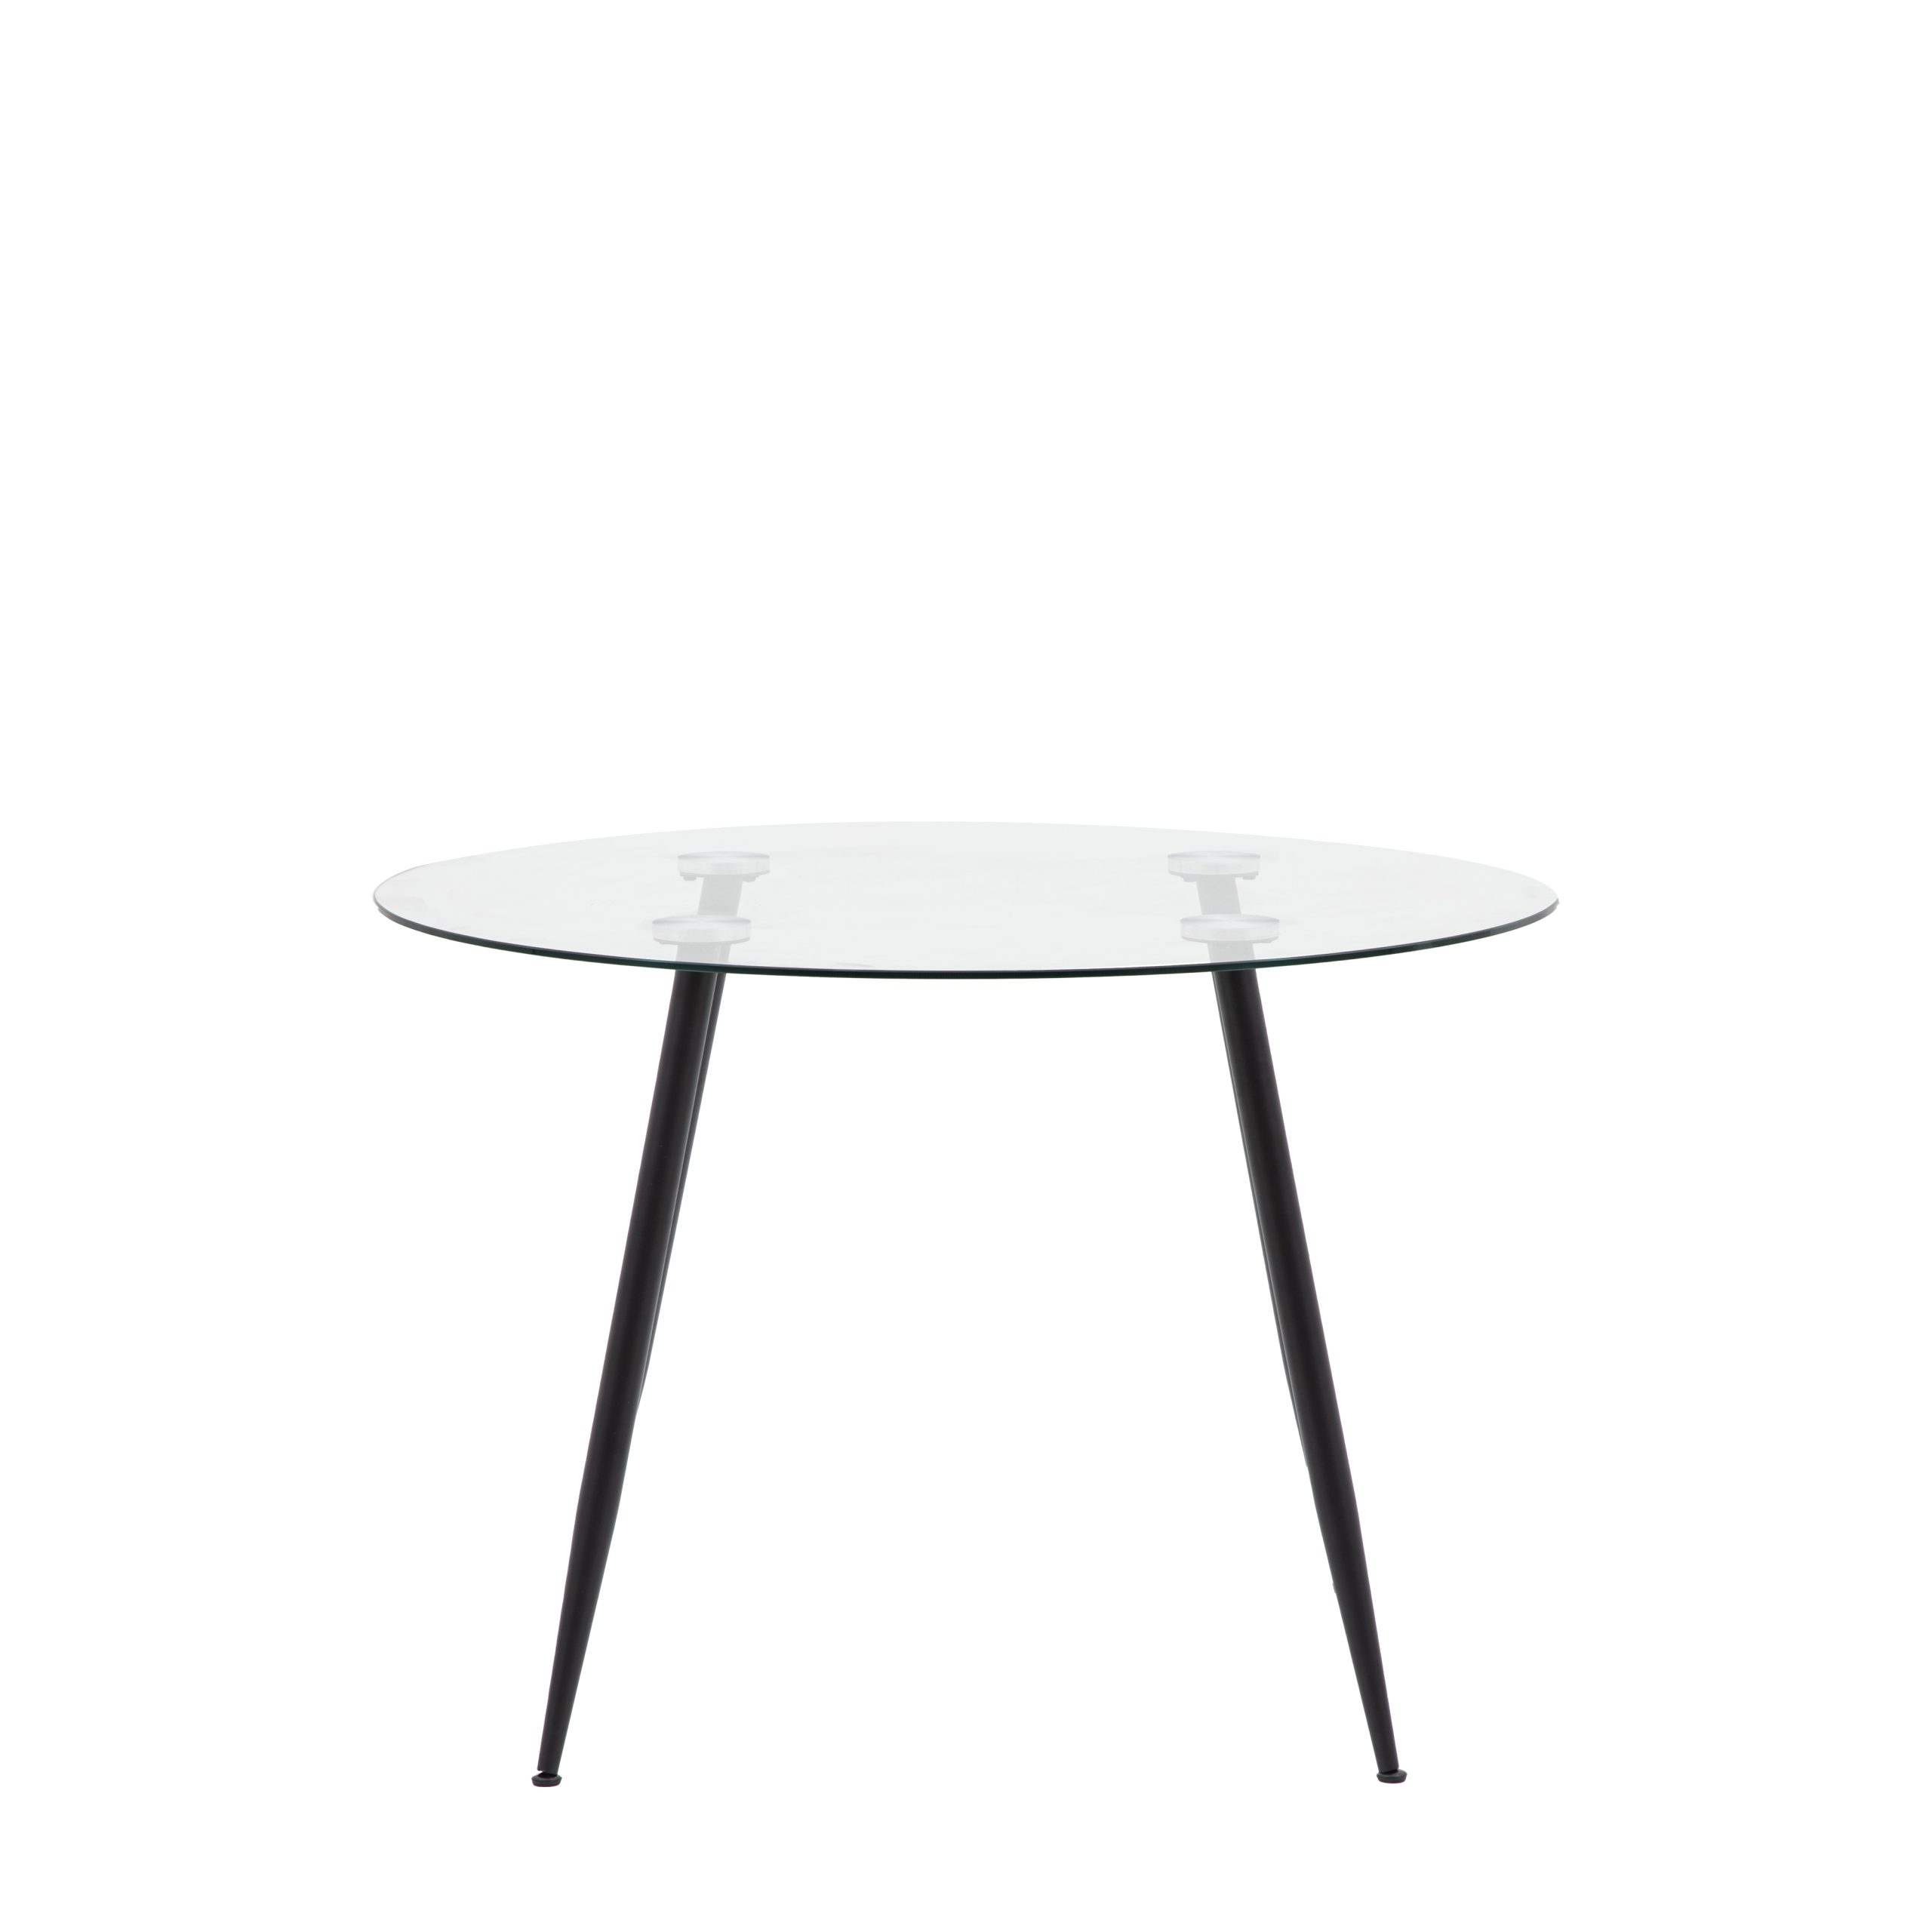 Gallery Direct Mack Dining Table